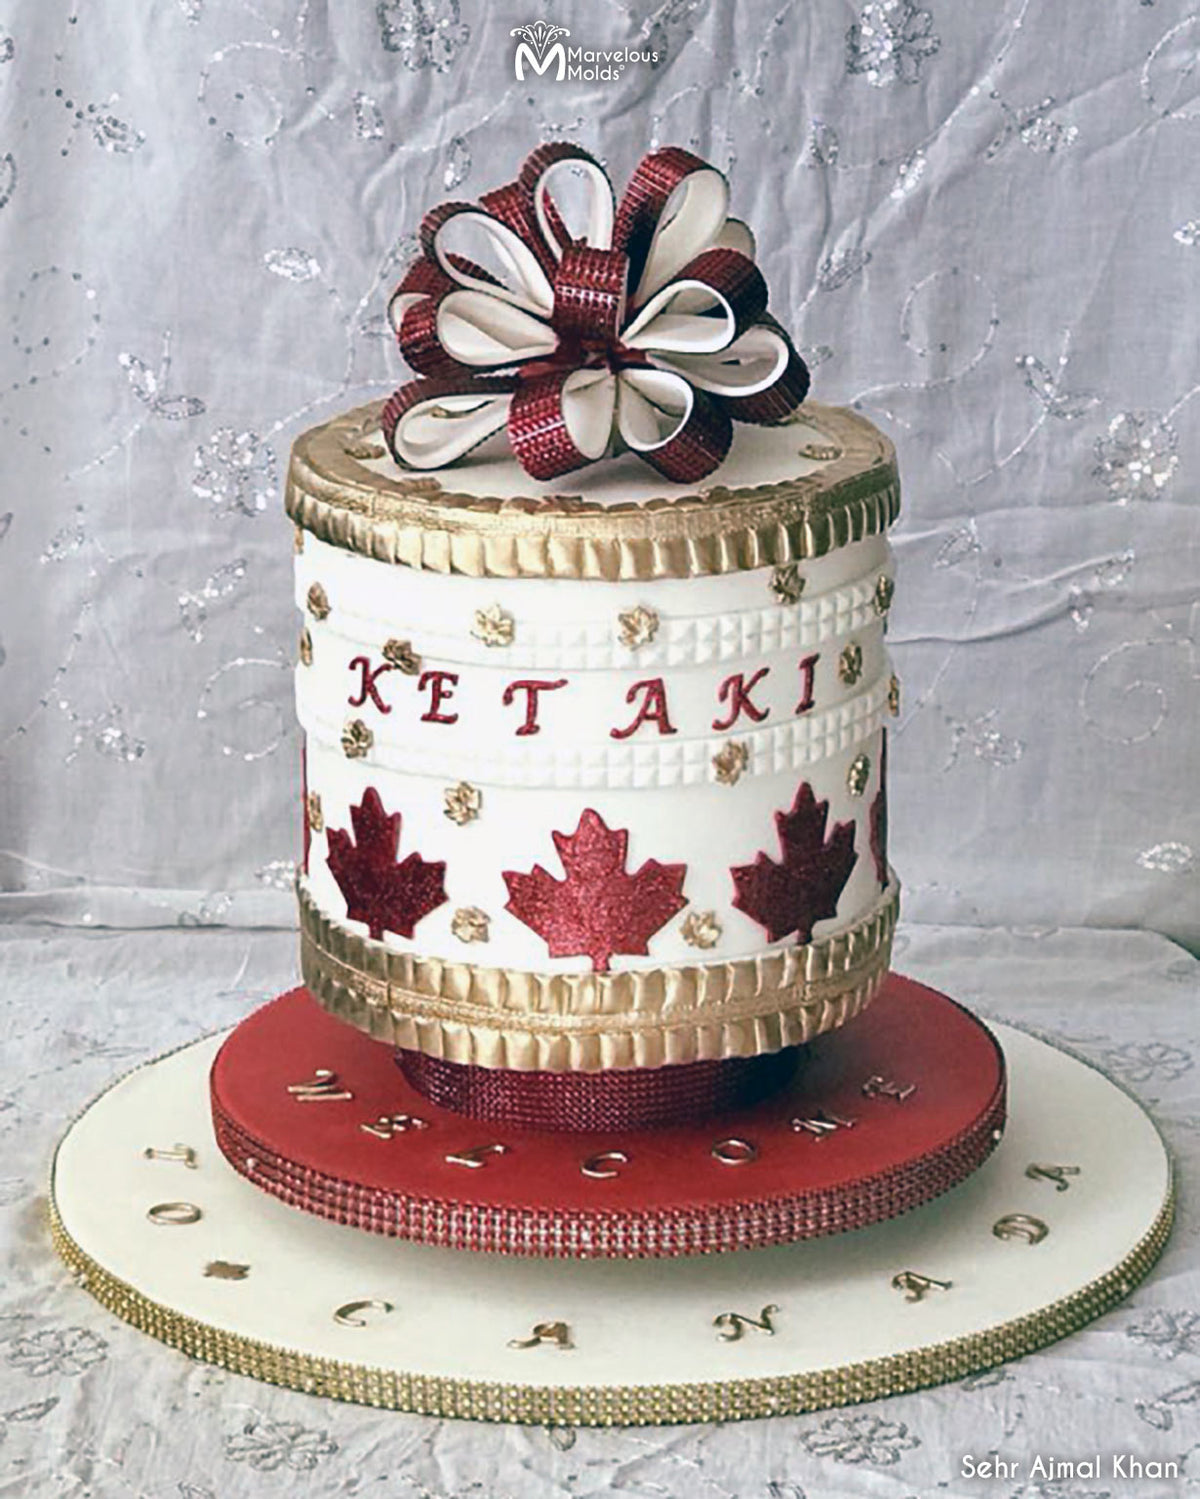 Canadian Cake decorated using Calligraphy Uppercase Flexabet letter Maker by Marvelous Molds